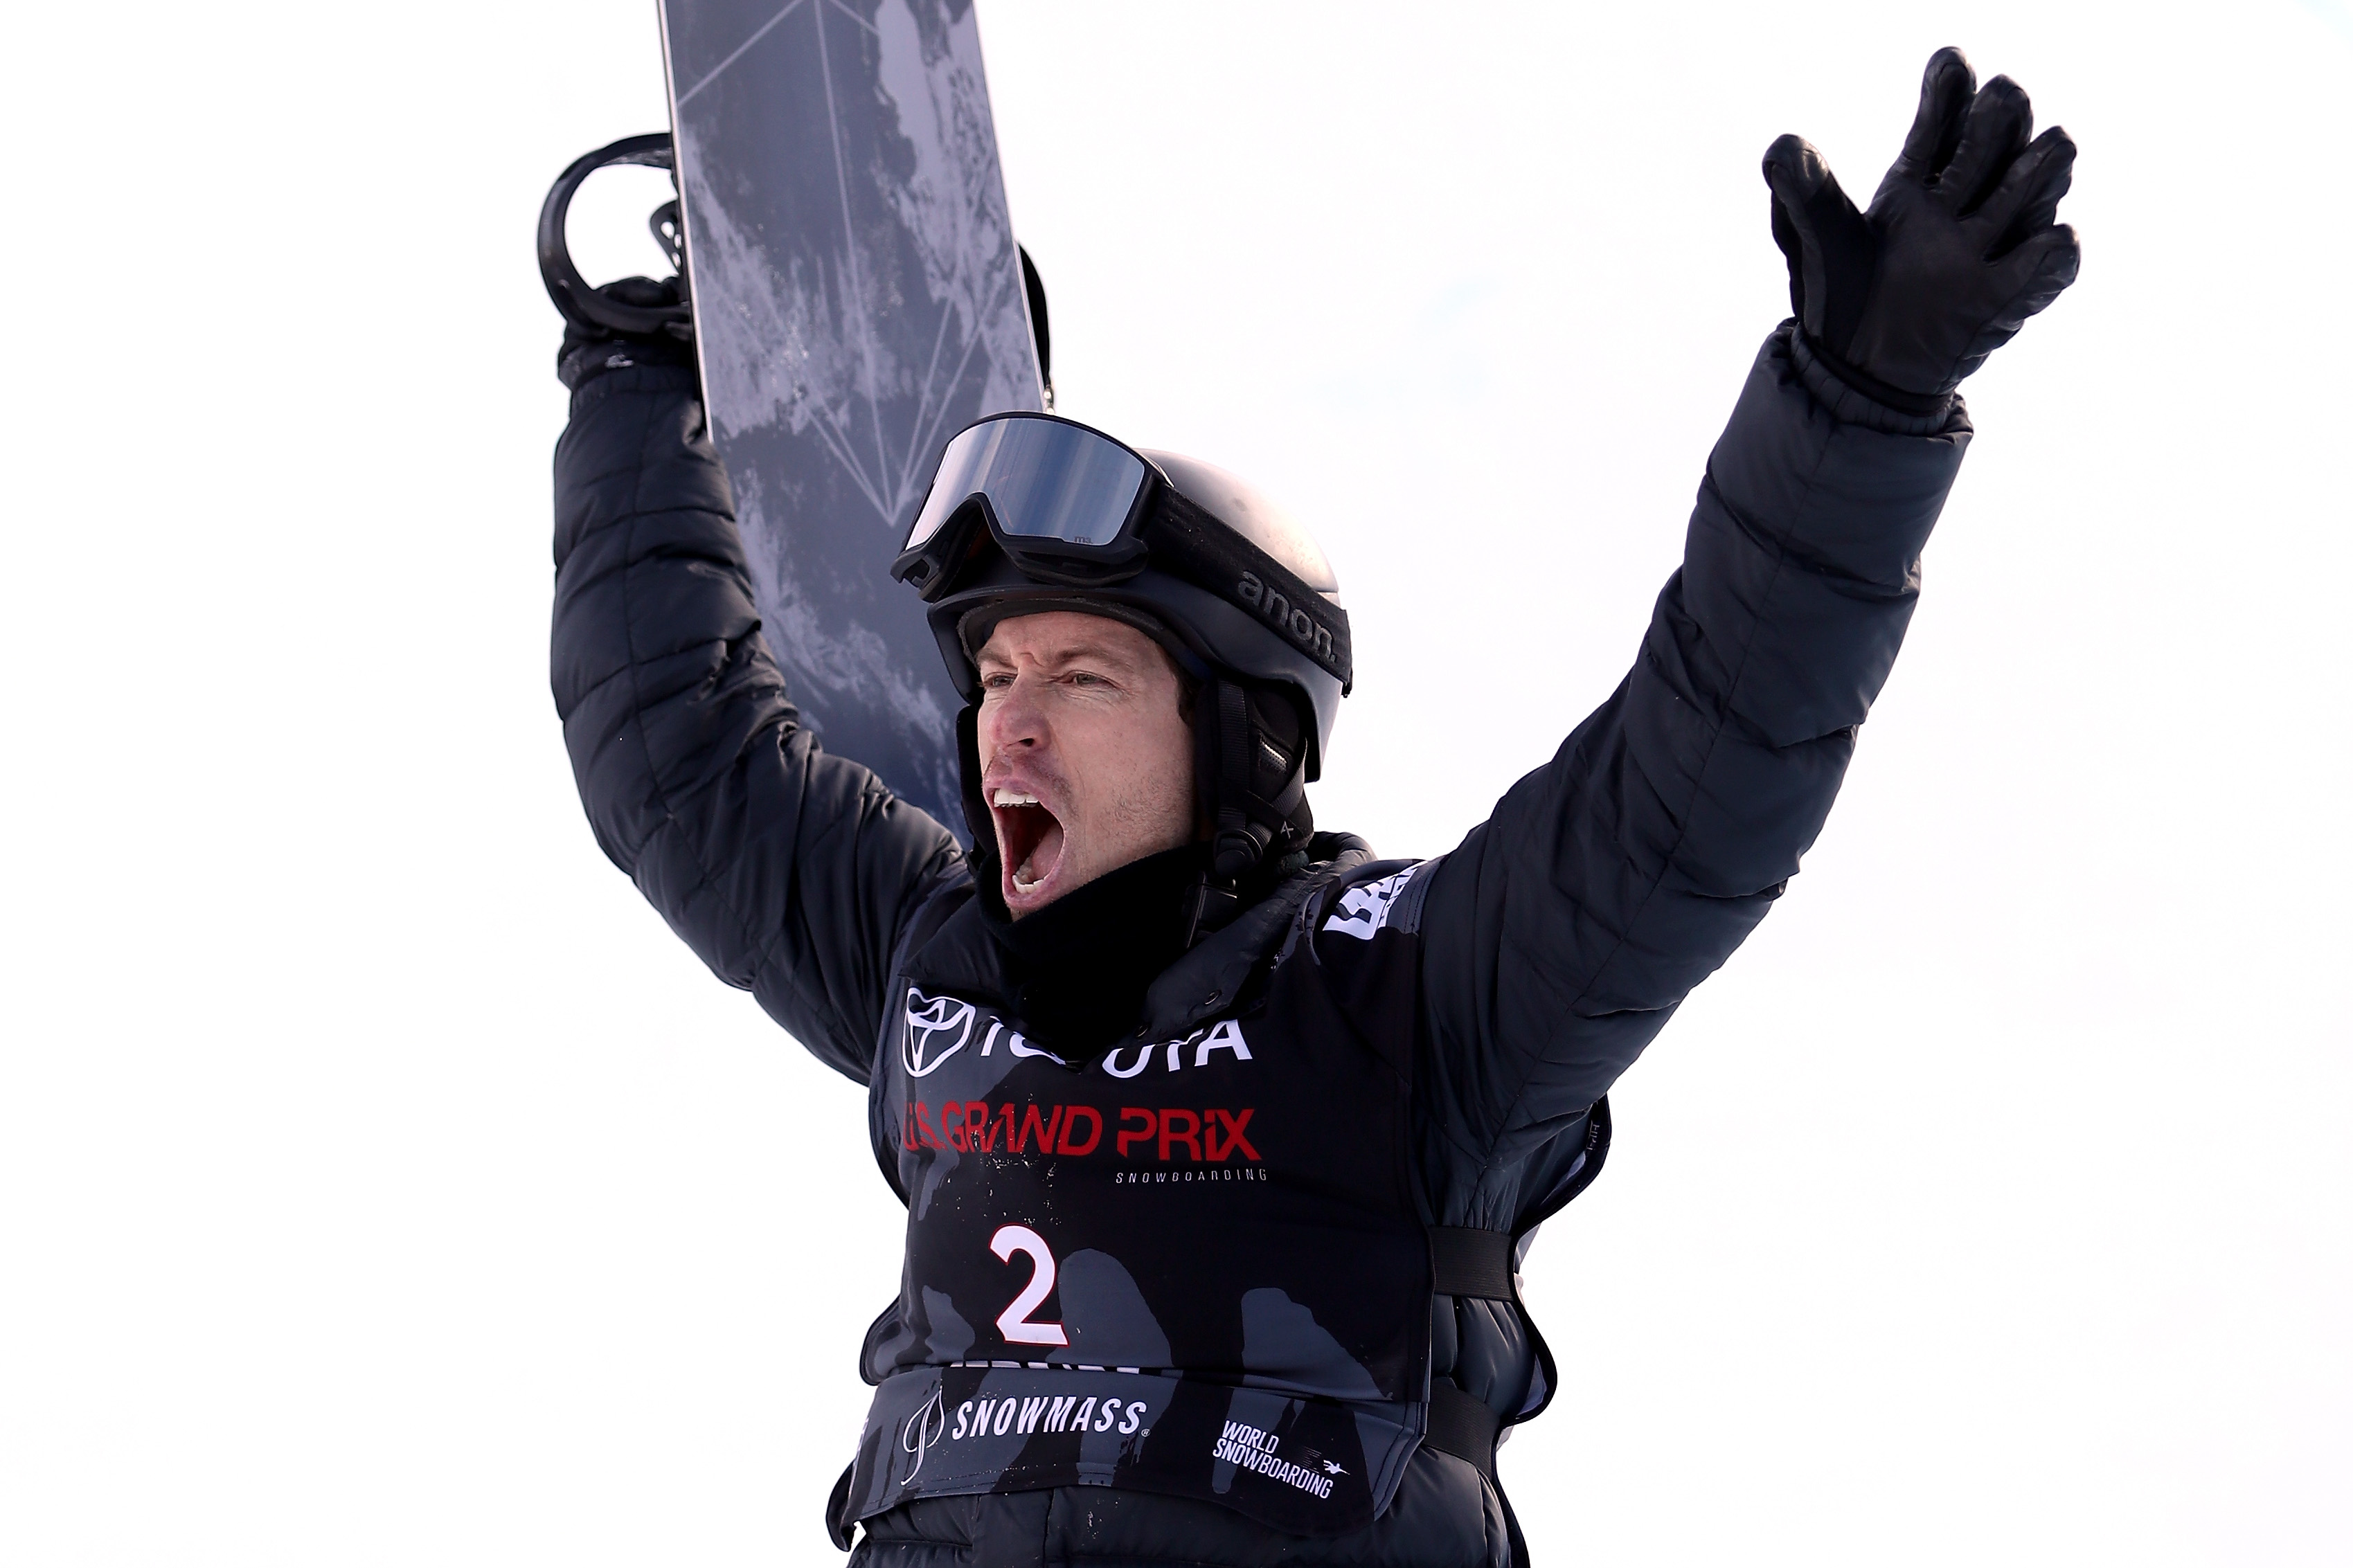 How to watch Shaun White at the 2018 Winter Olympics wcnc